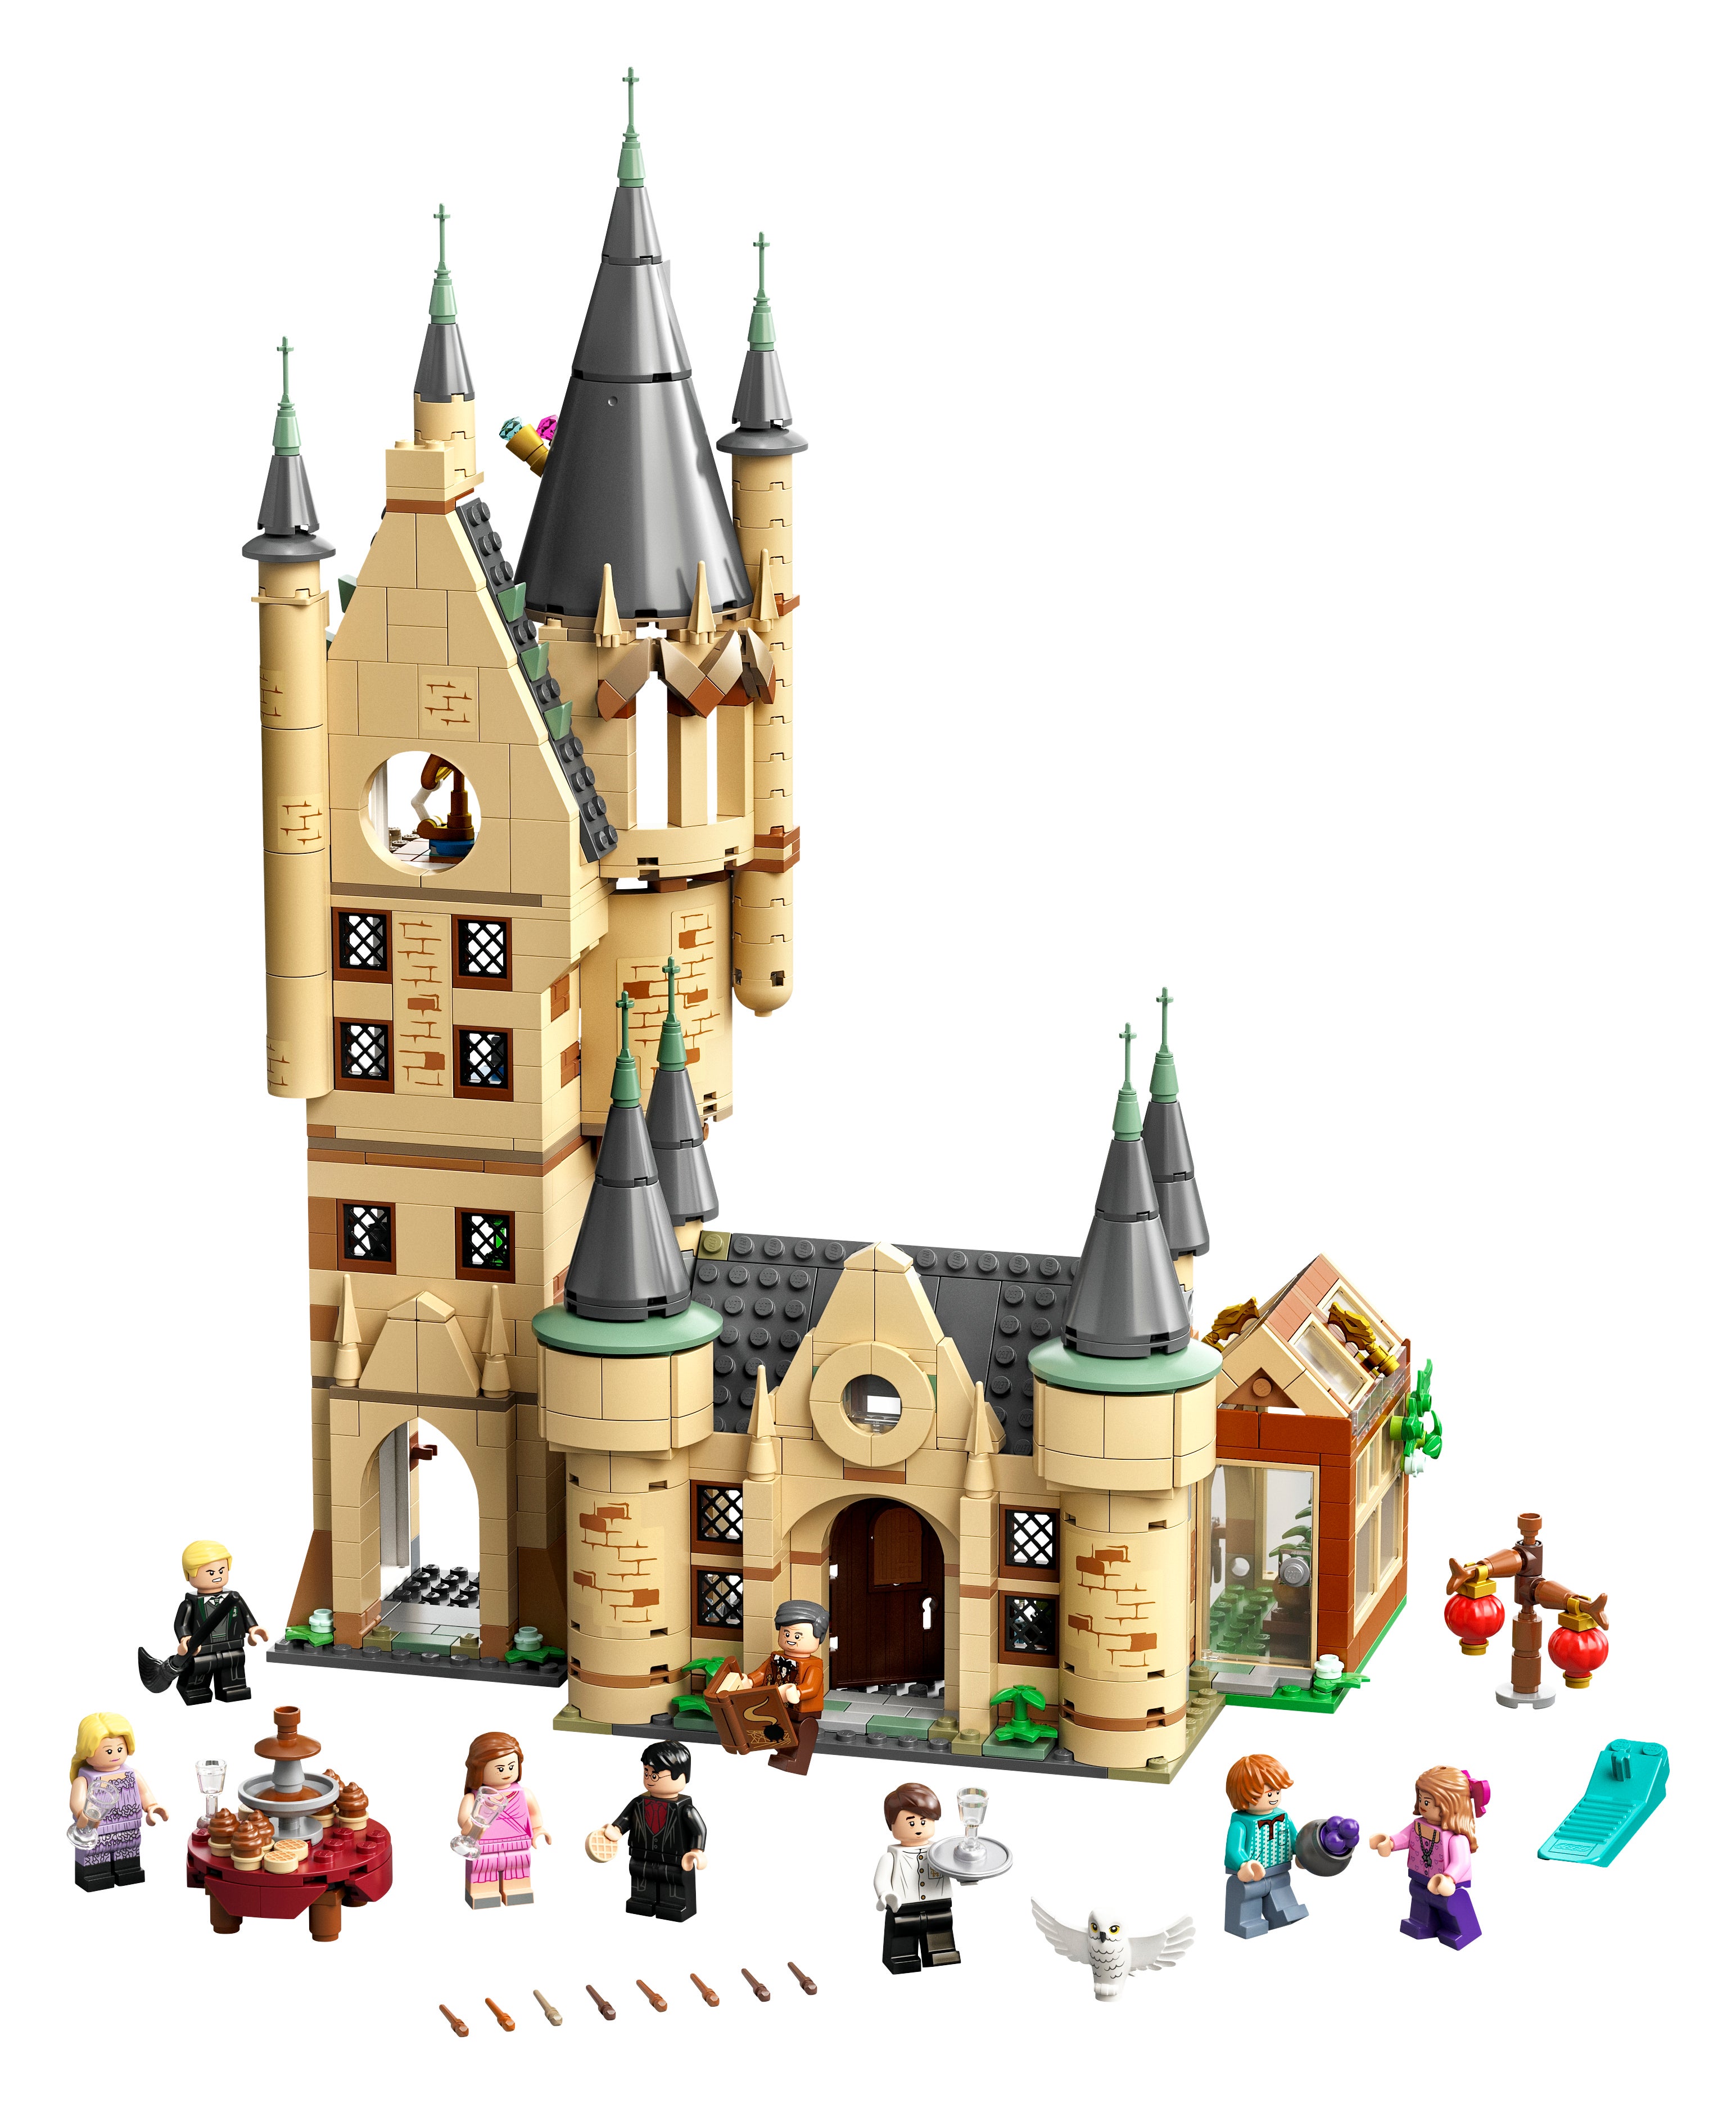 LEGO Harry Potter RON WEASLEY MINIFIGURE & OWL from 75948 Hogwarts Clock Tower 